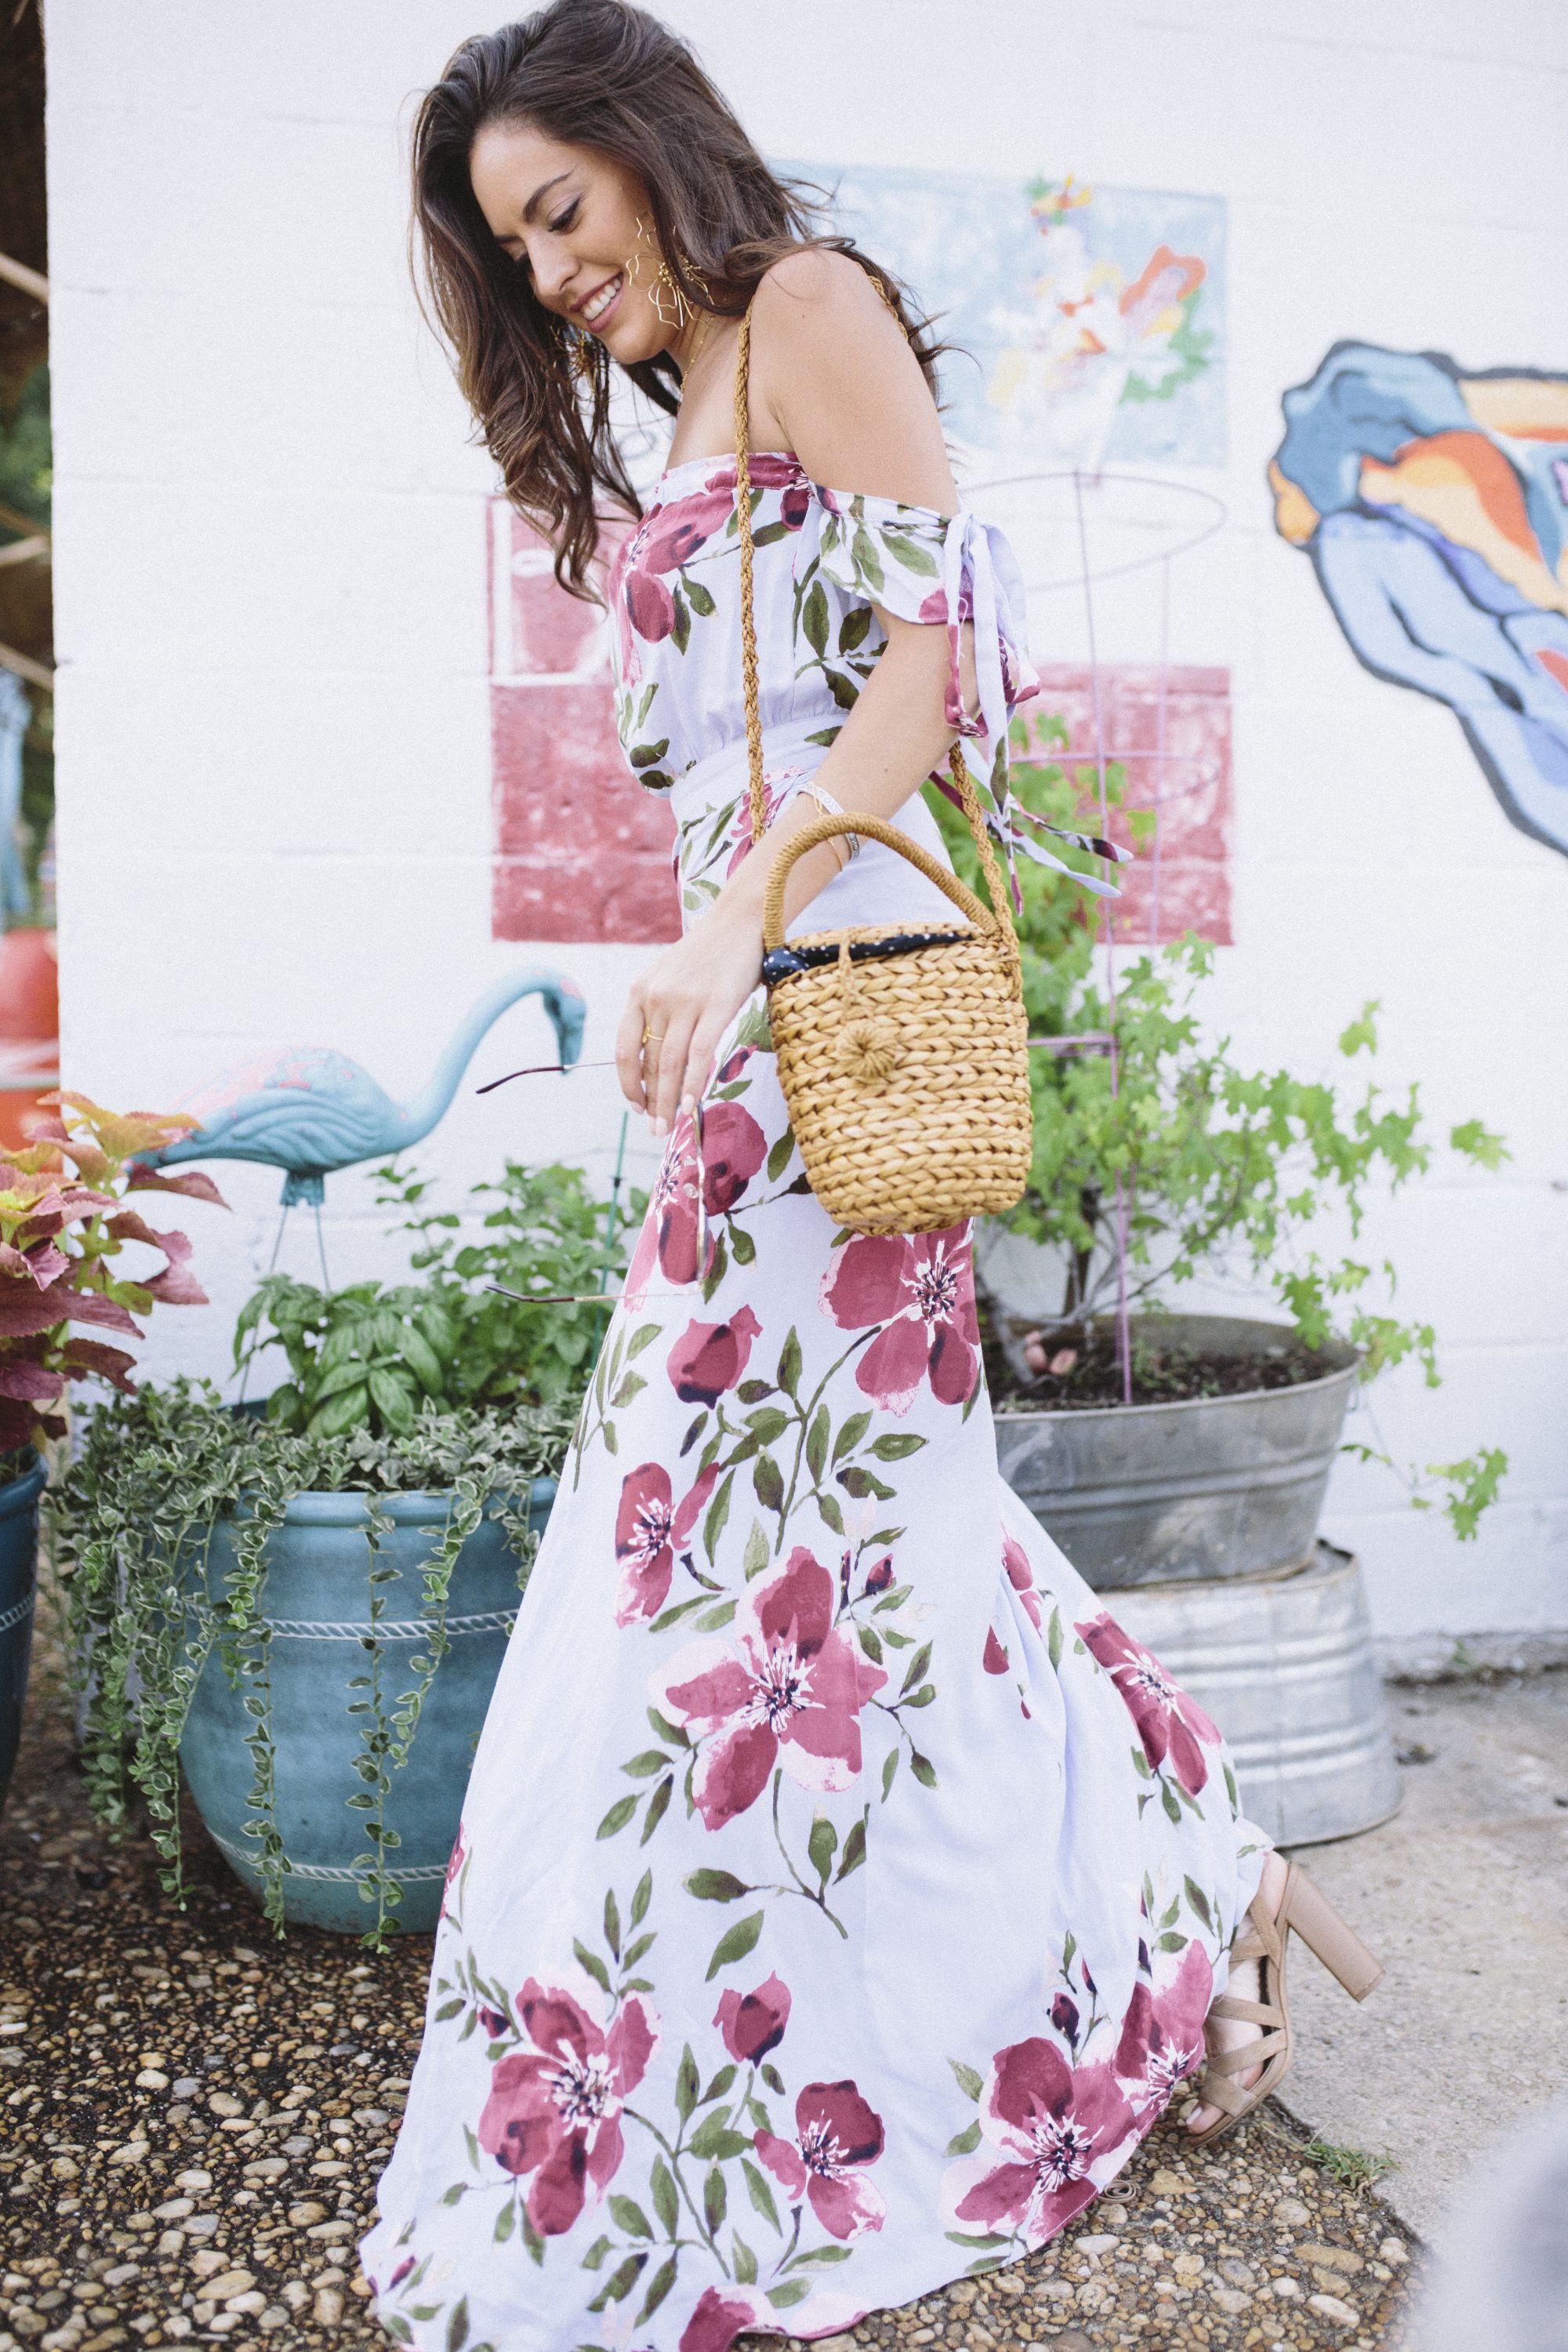 floral maxi dress, off the shoulder, summer style, summer outfit ideas, what to wear to a summer wedding, what to wear on a first date, south moon under Abbeline Off Shoulder Floral Printed Maxi Wrap Dress, baublebar Blossom Drop Earrings, straw bucket bag, atlanta style blogger